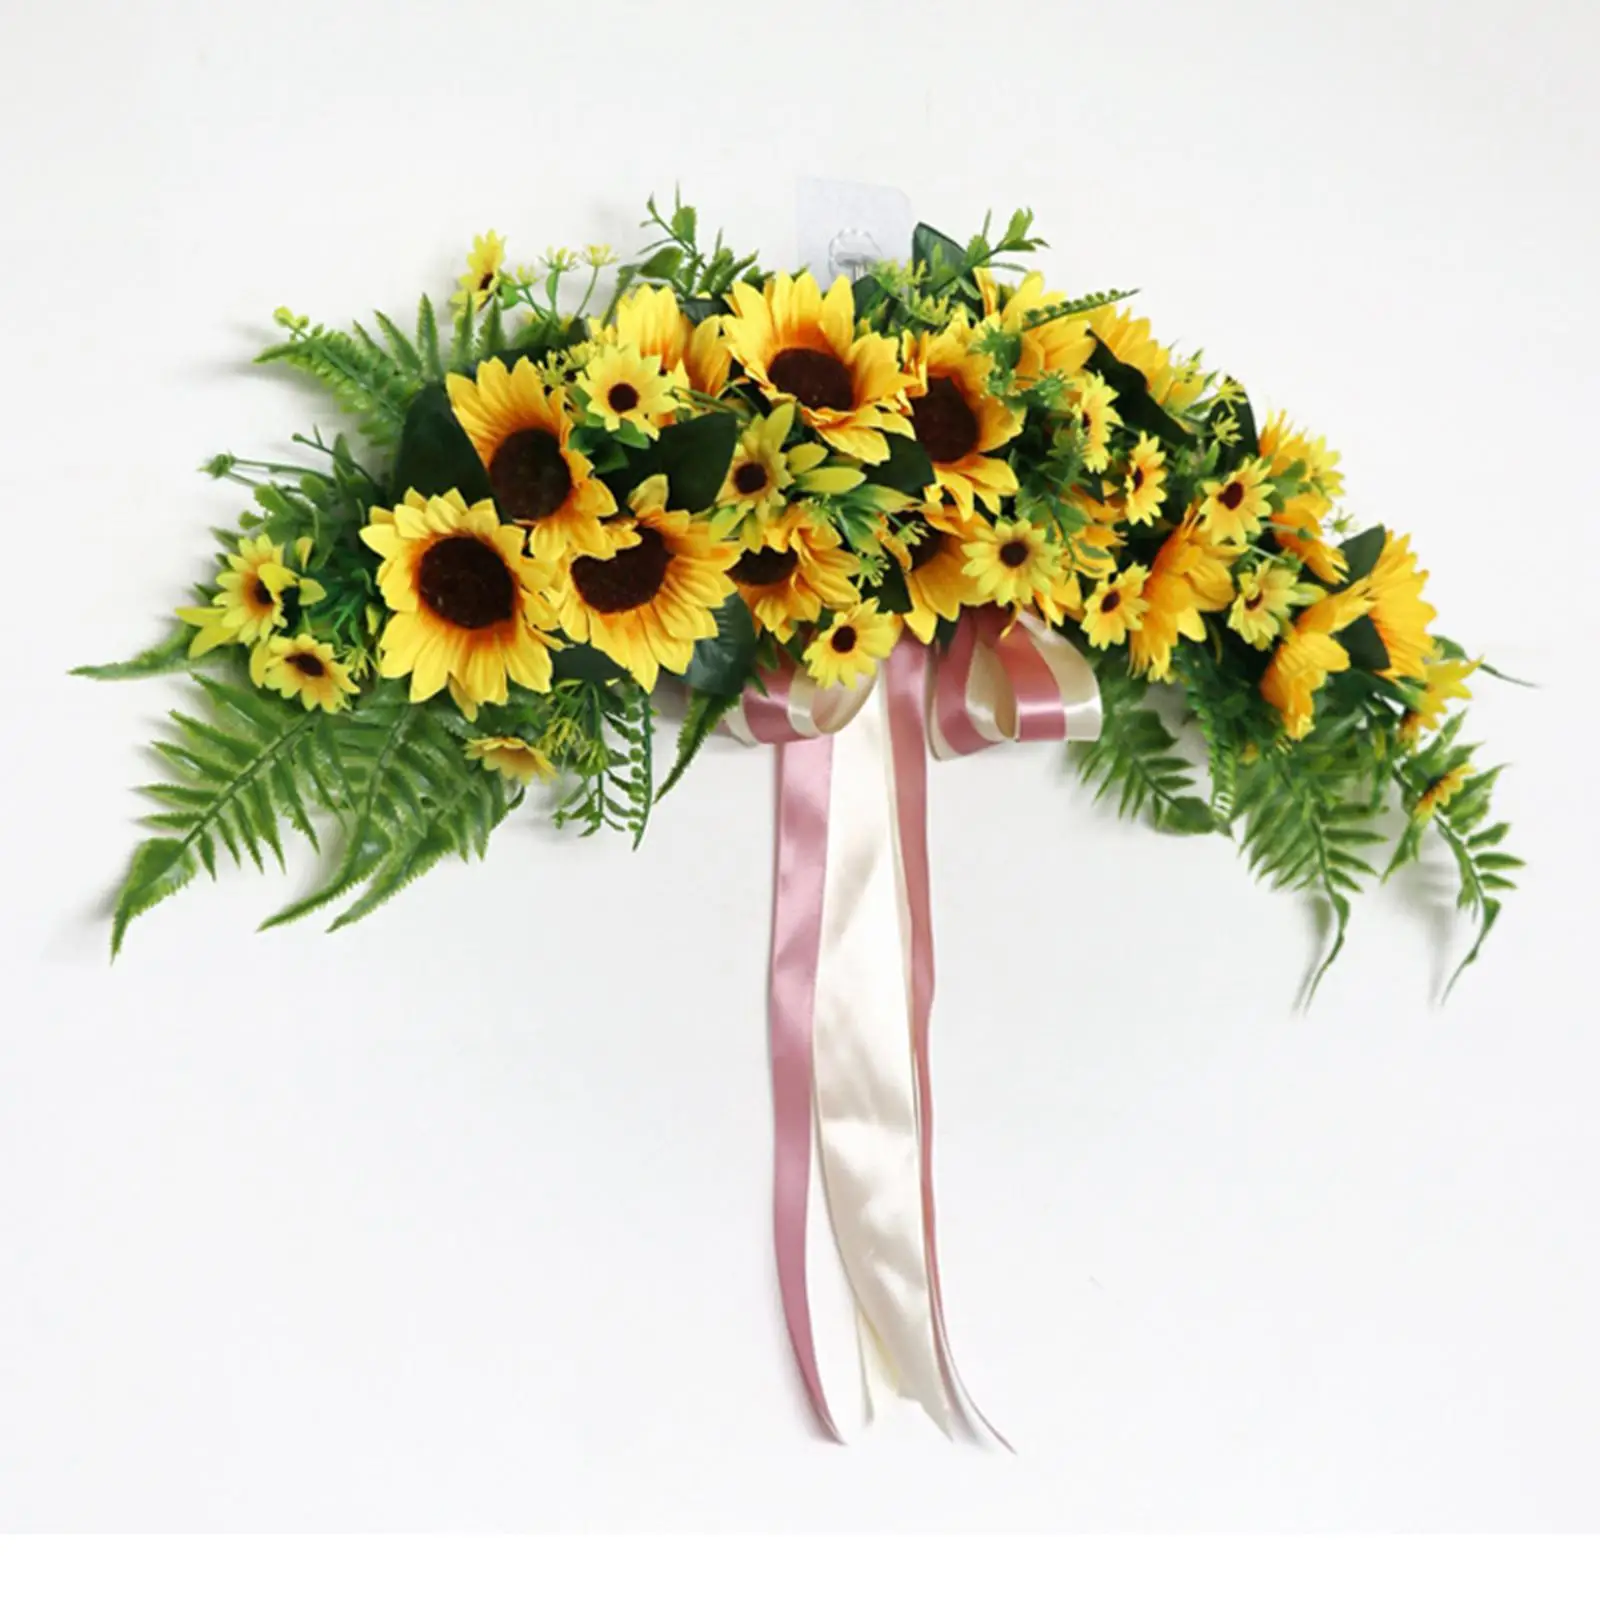 29 inch Artificial Sunflower Swag Floral Garland for Garden Party Decoration